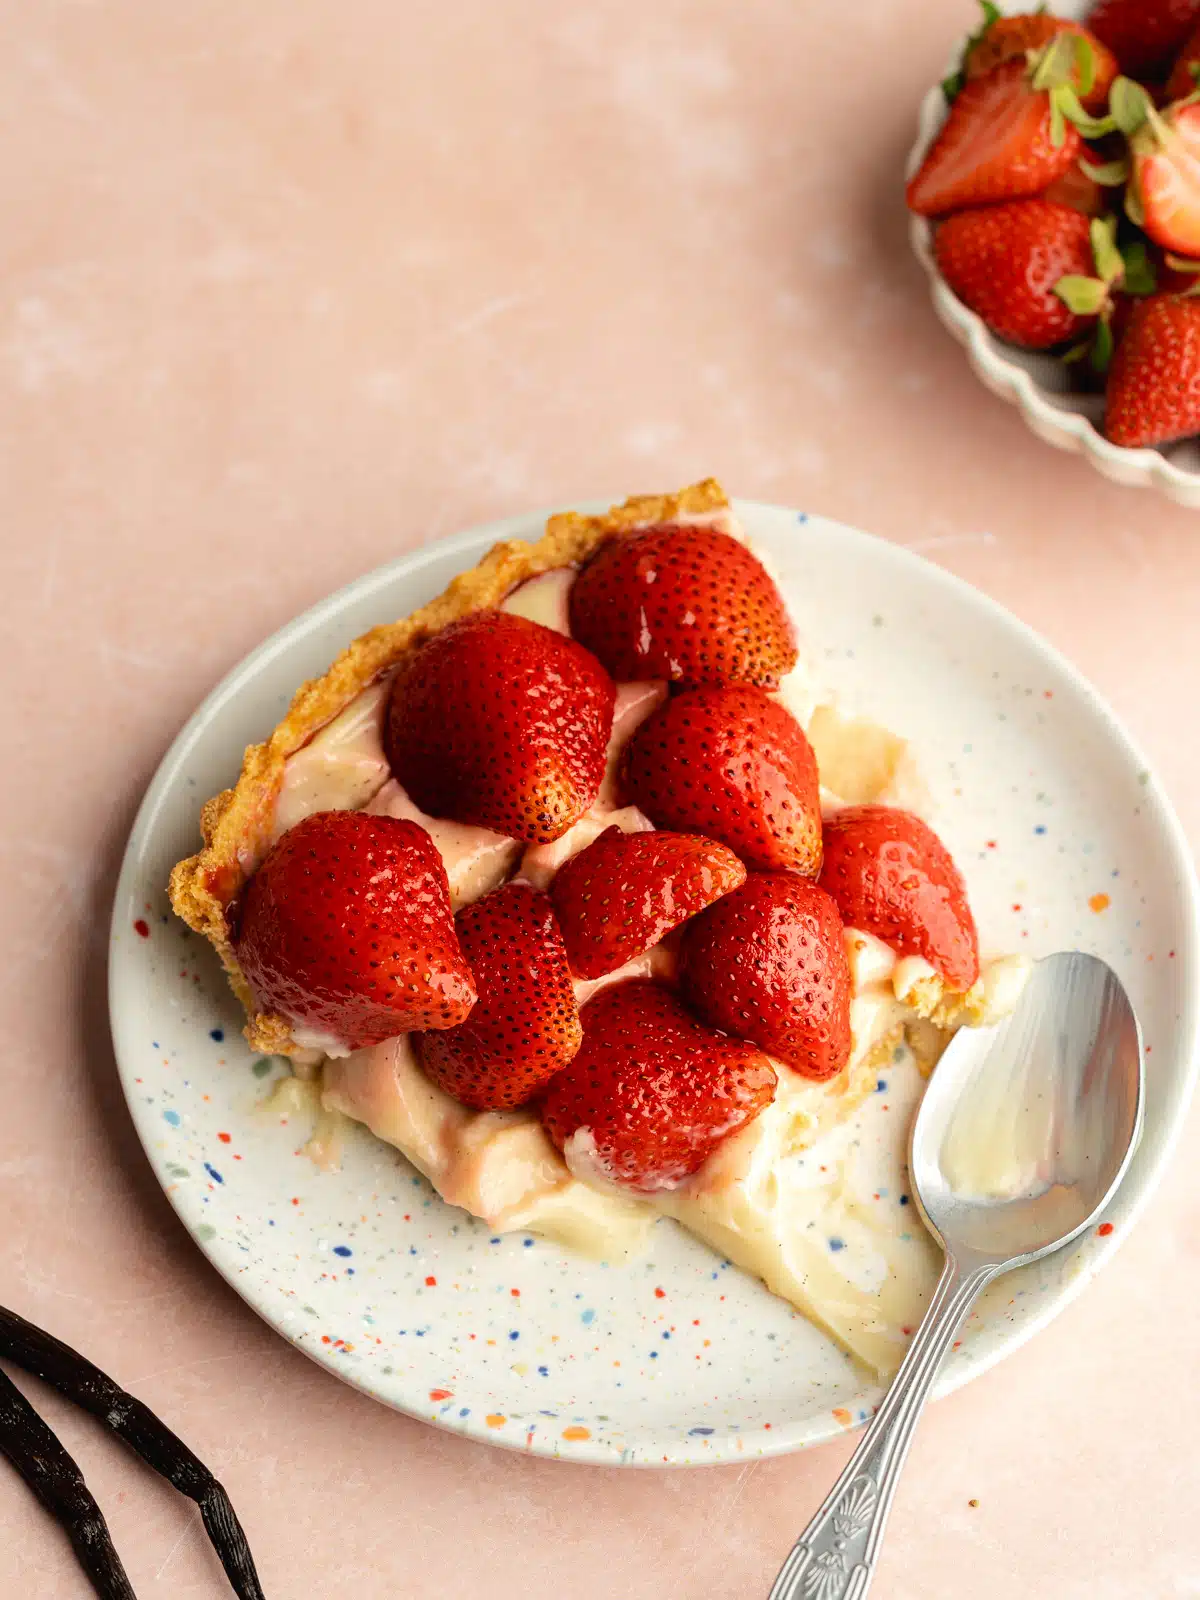 a slice of strawberry custard tart on a ceramic plate with a bitefull taken from it.